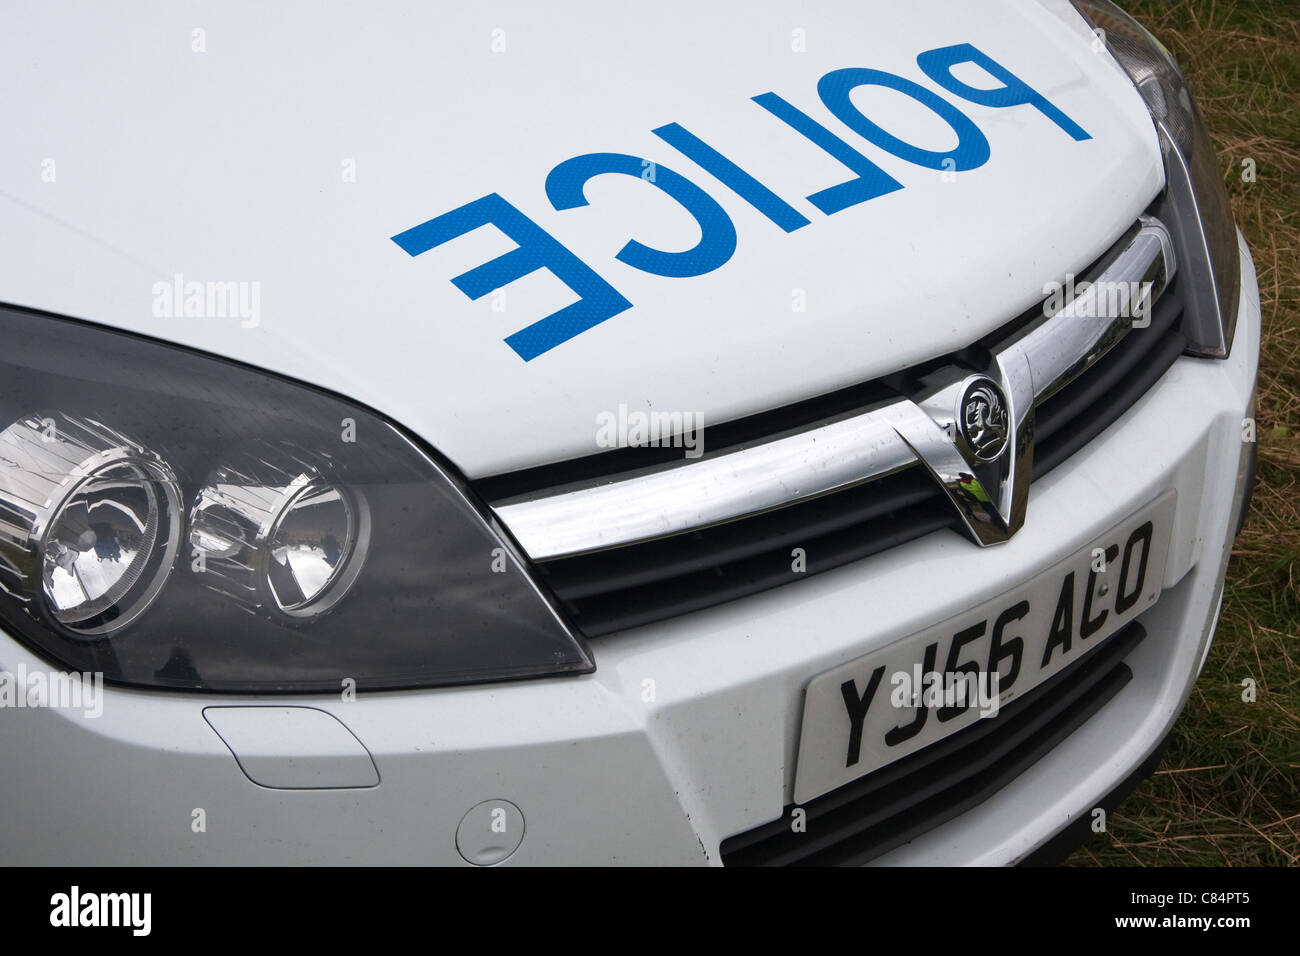 Front of Vauxhall Astra Police car Stock Photo